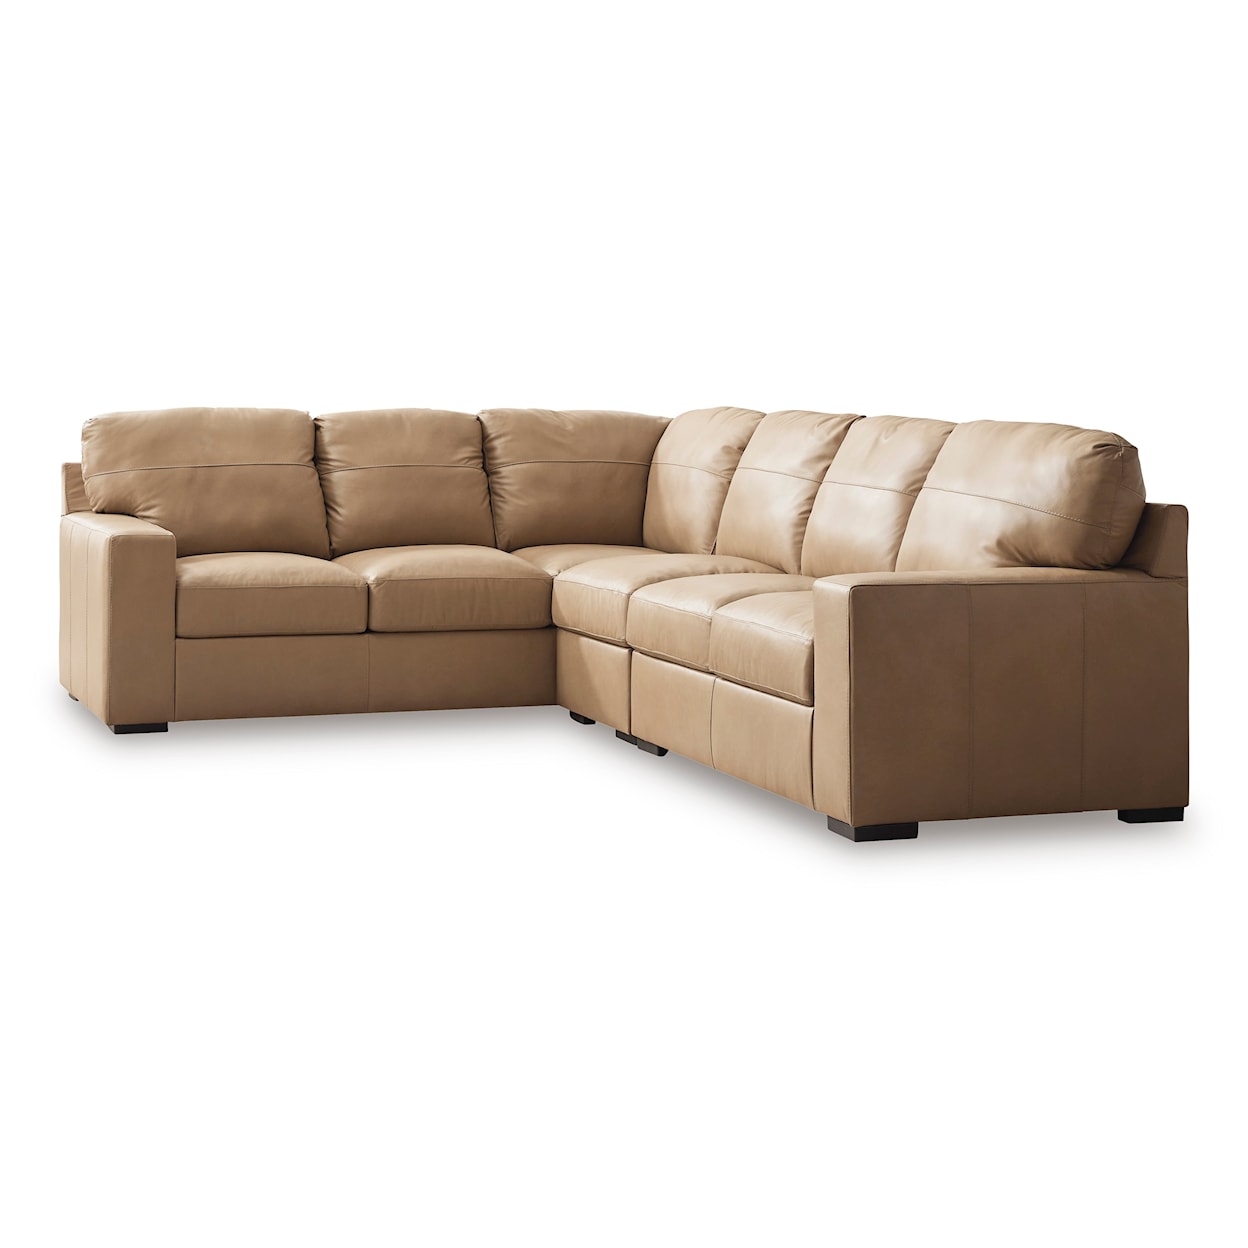 Benchcraft Bandon 3-Piece Sectional